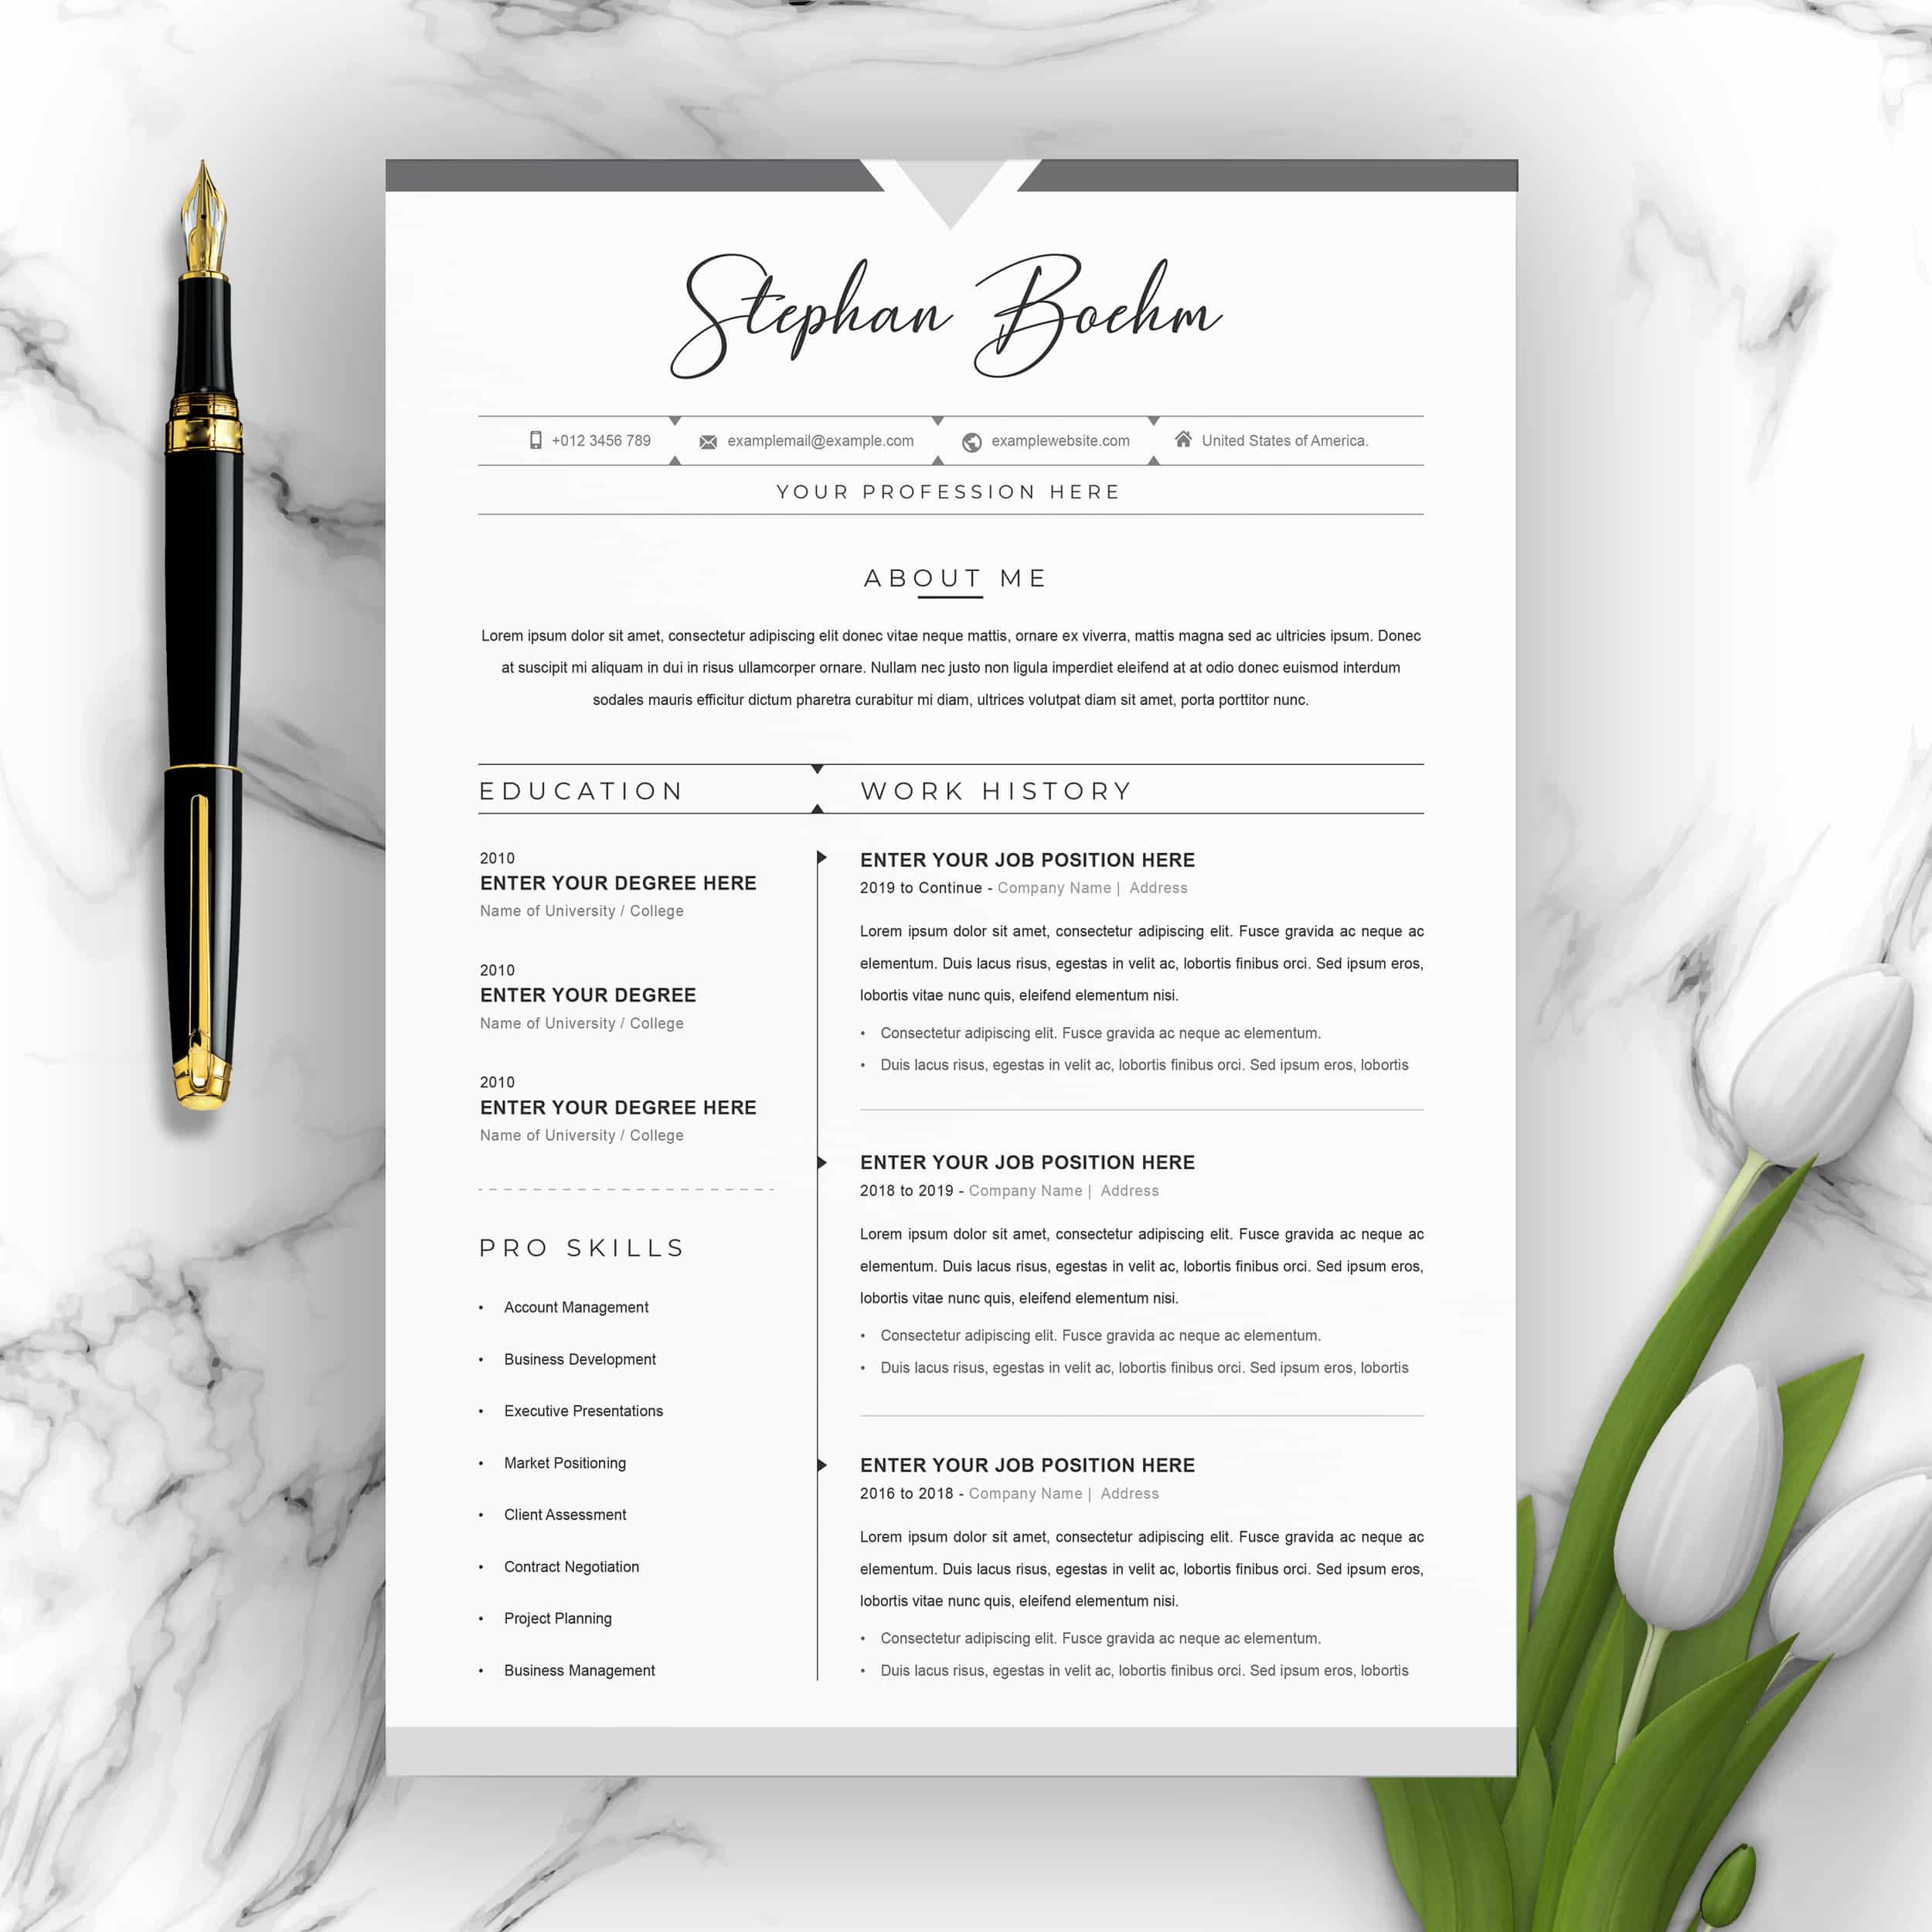 Clean Resume / CV Template with MS Word Cover Letter â Crella